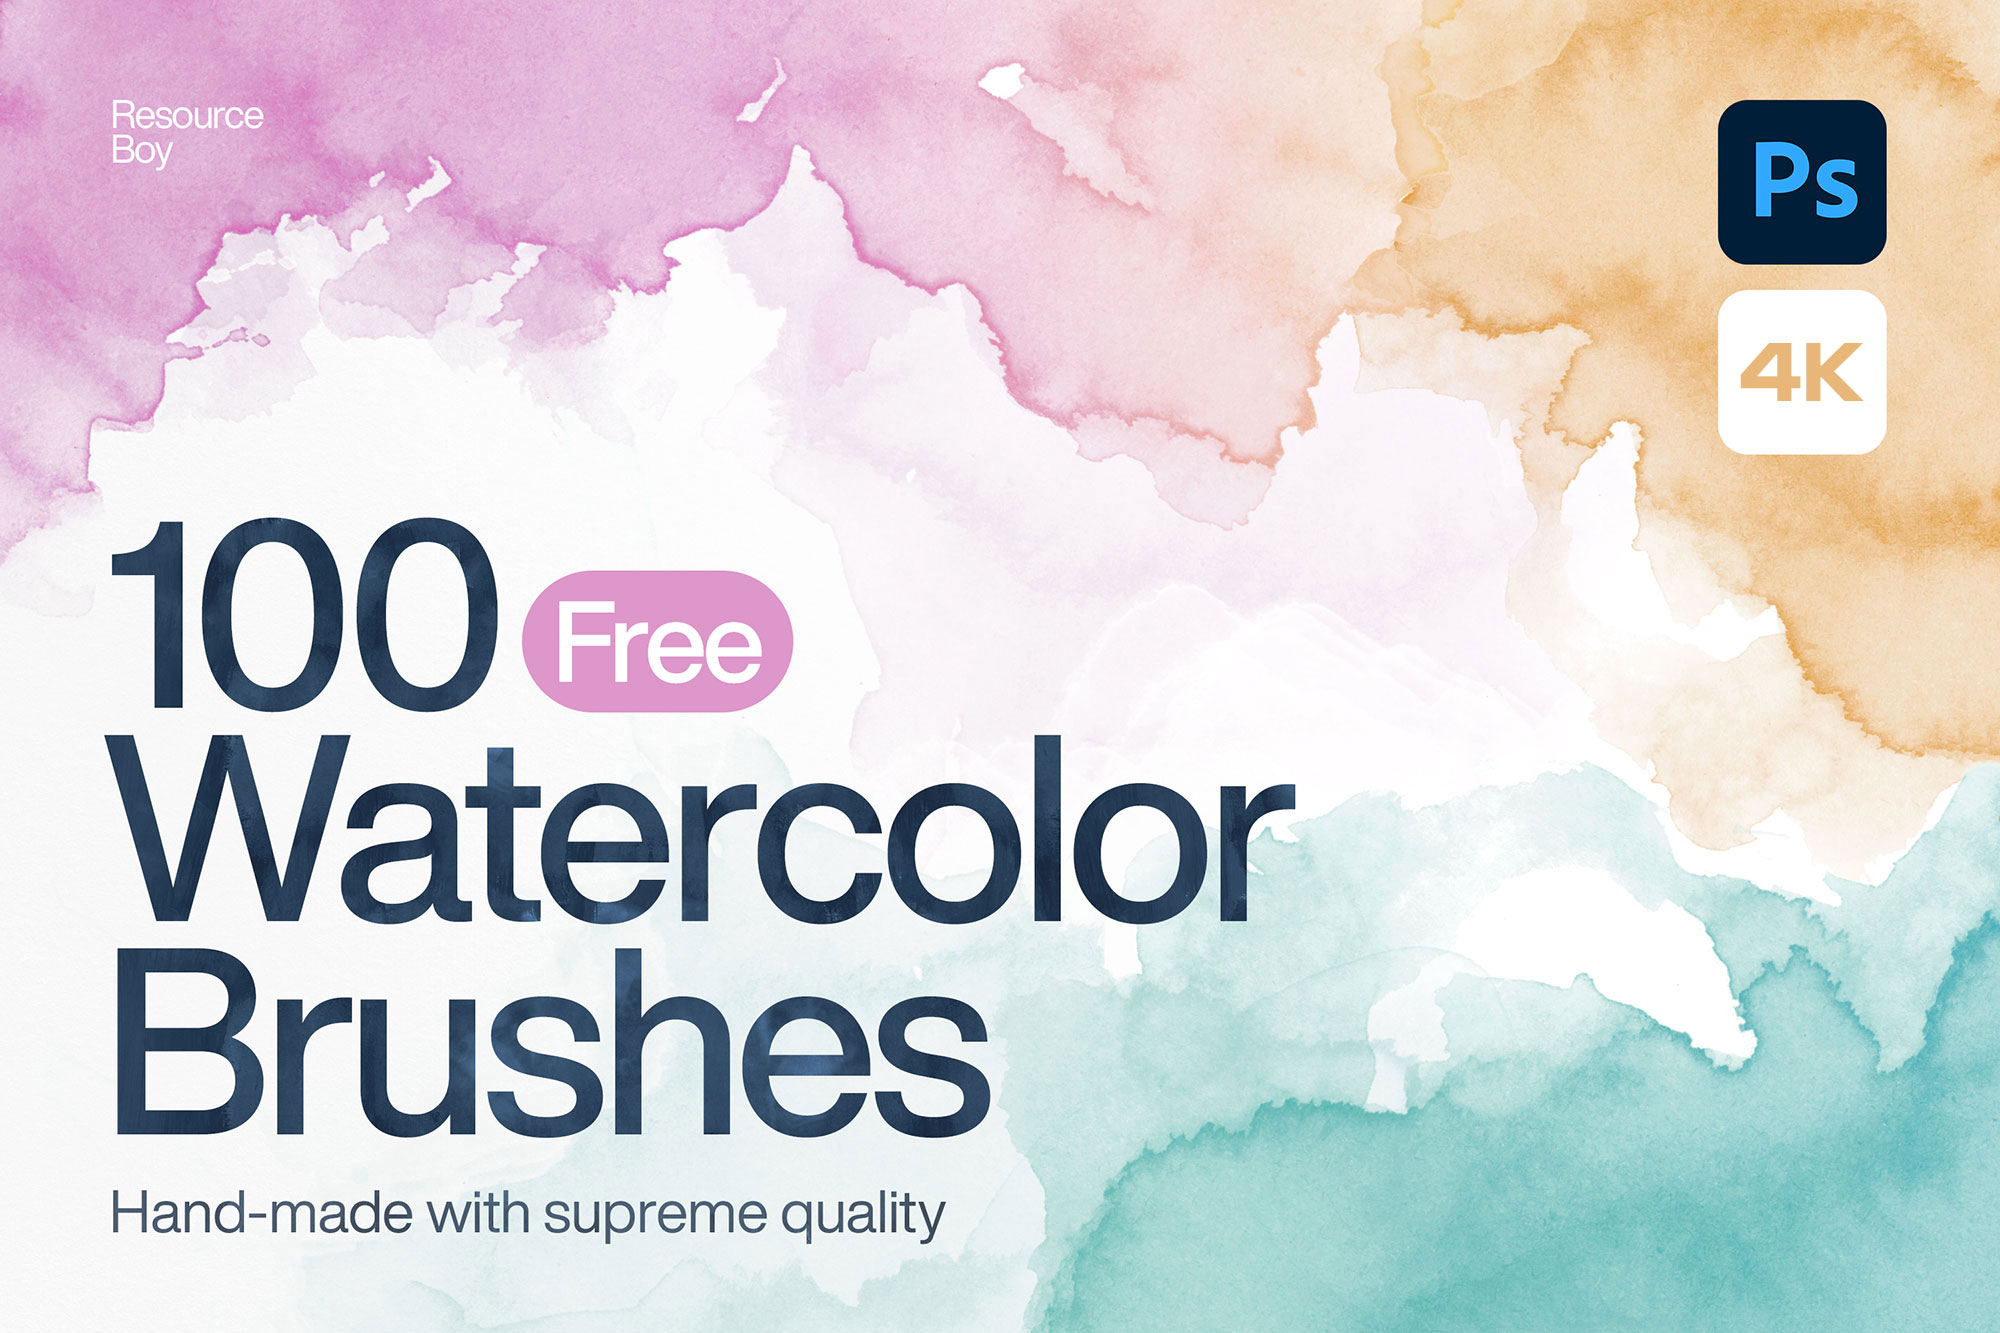 photoshop watercolor brushes free download